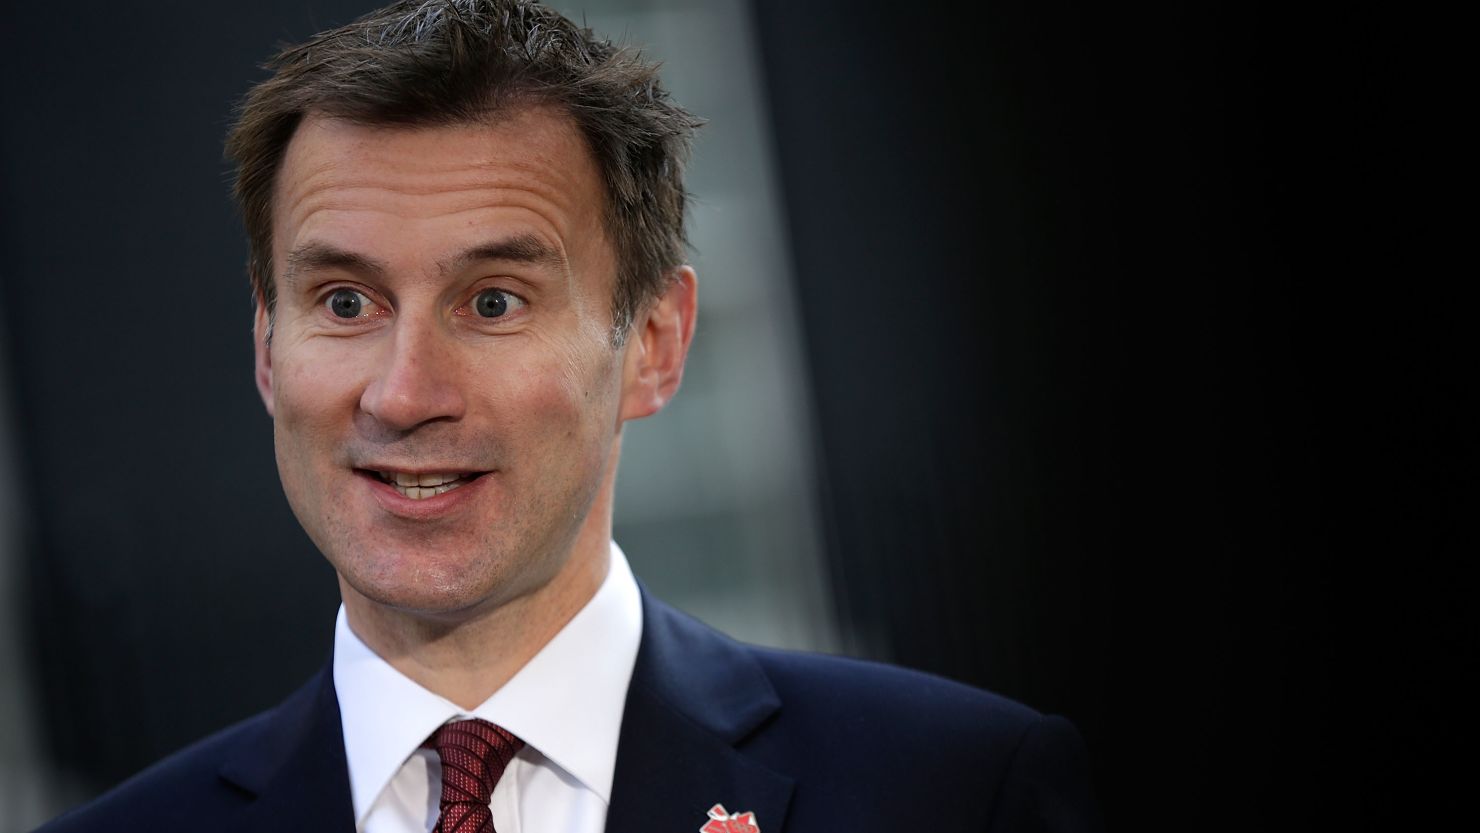 Jeremy Hunt rejects suggestions he had acted improperly in his dealings with Rupert Murdoch's News Corp.